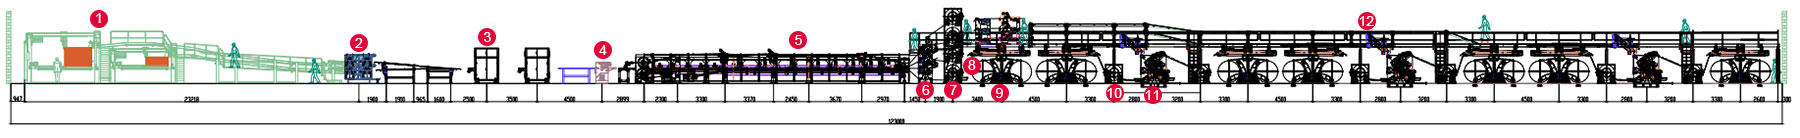 Layout of 7-ply Corrugated Cardboard Production Line